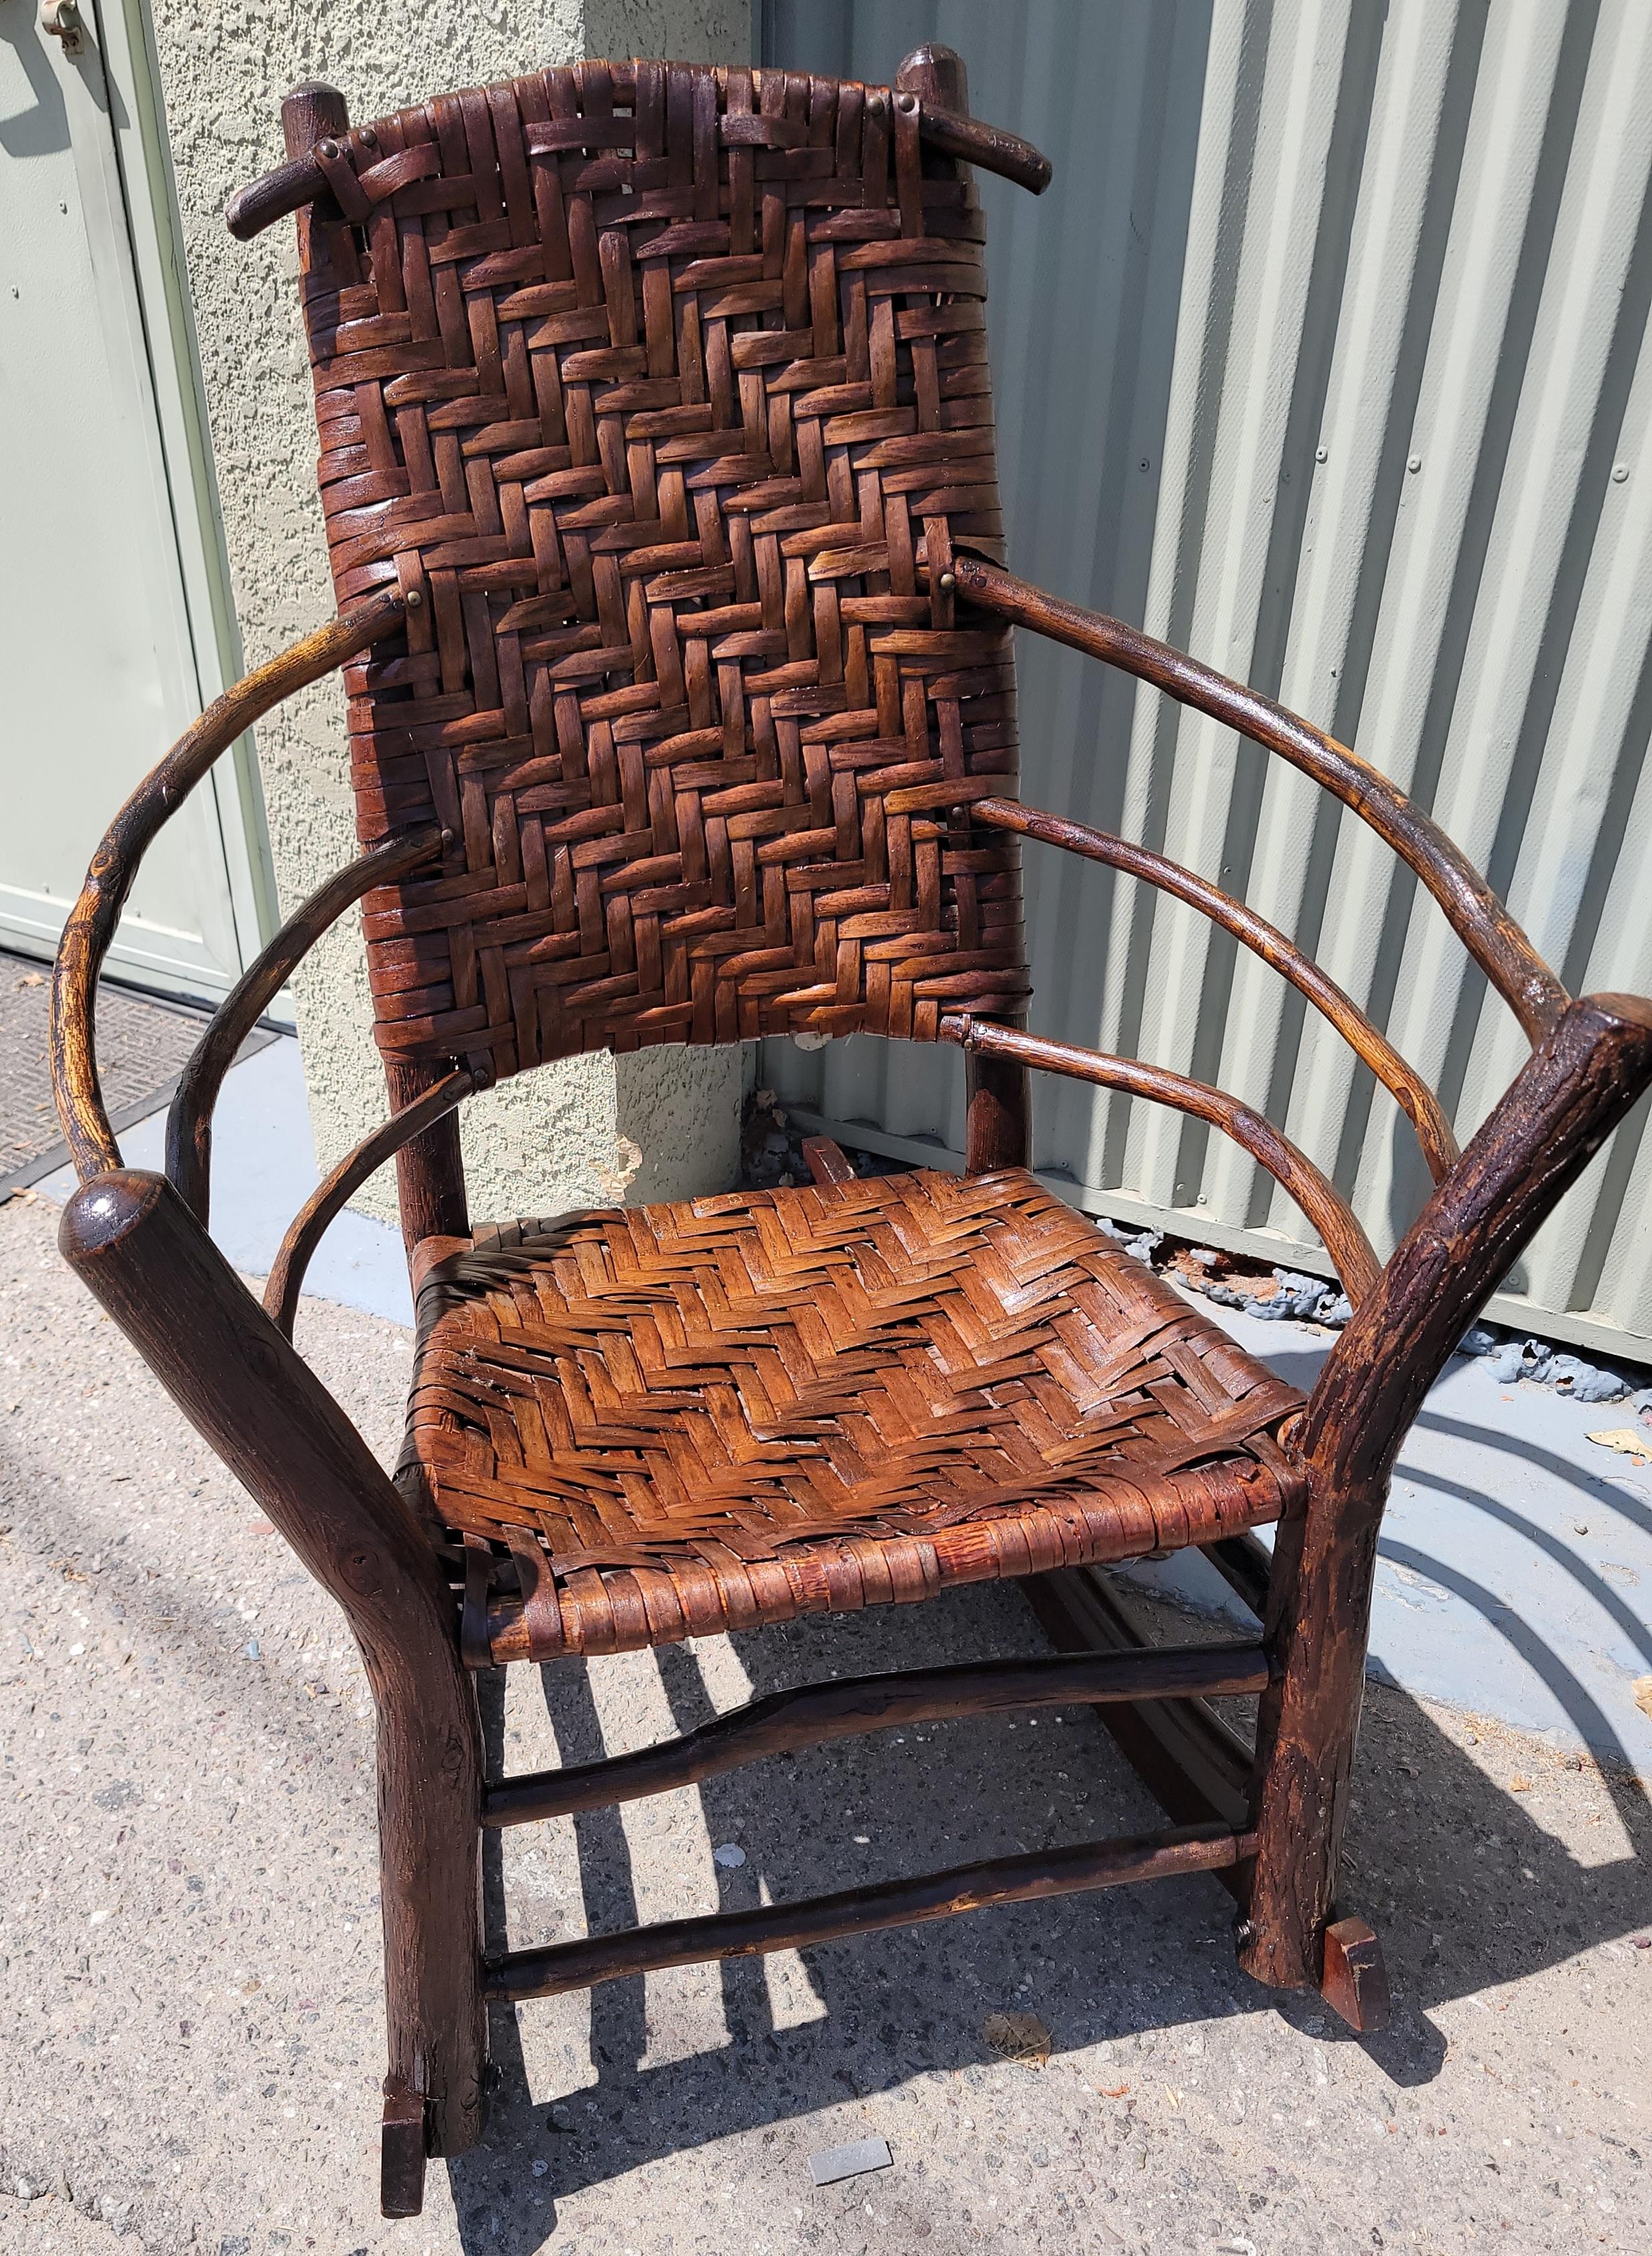 Beautiful 19thc  old hickory rustic  high back rocking chair. Great  sturdy condition.
This rocking chairs is a hand made and hand woven seat & backing.This was found in Pennsylvania.